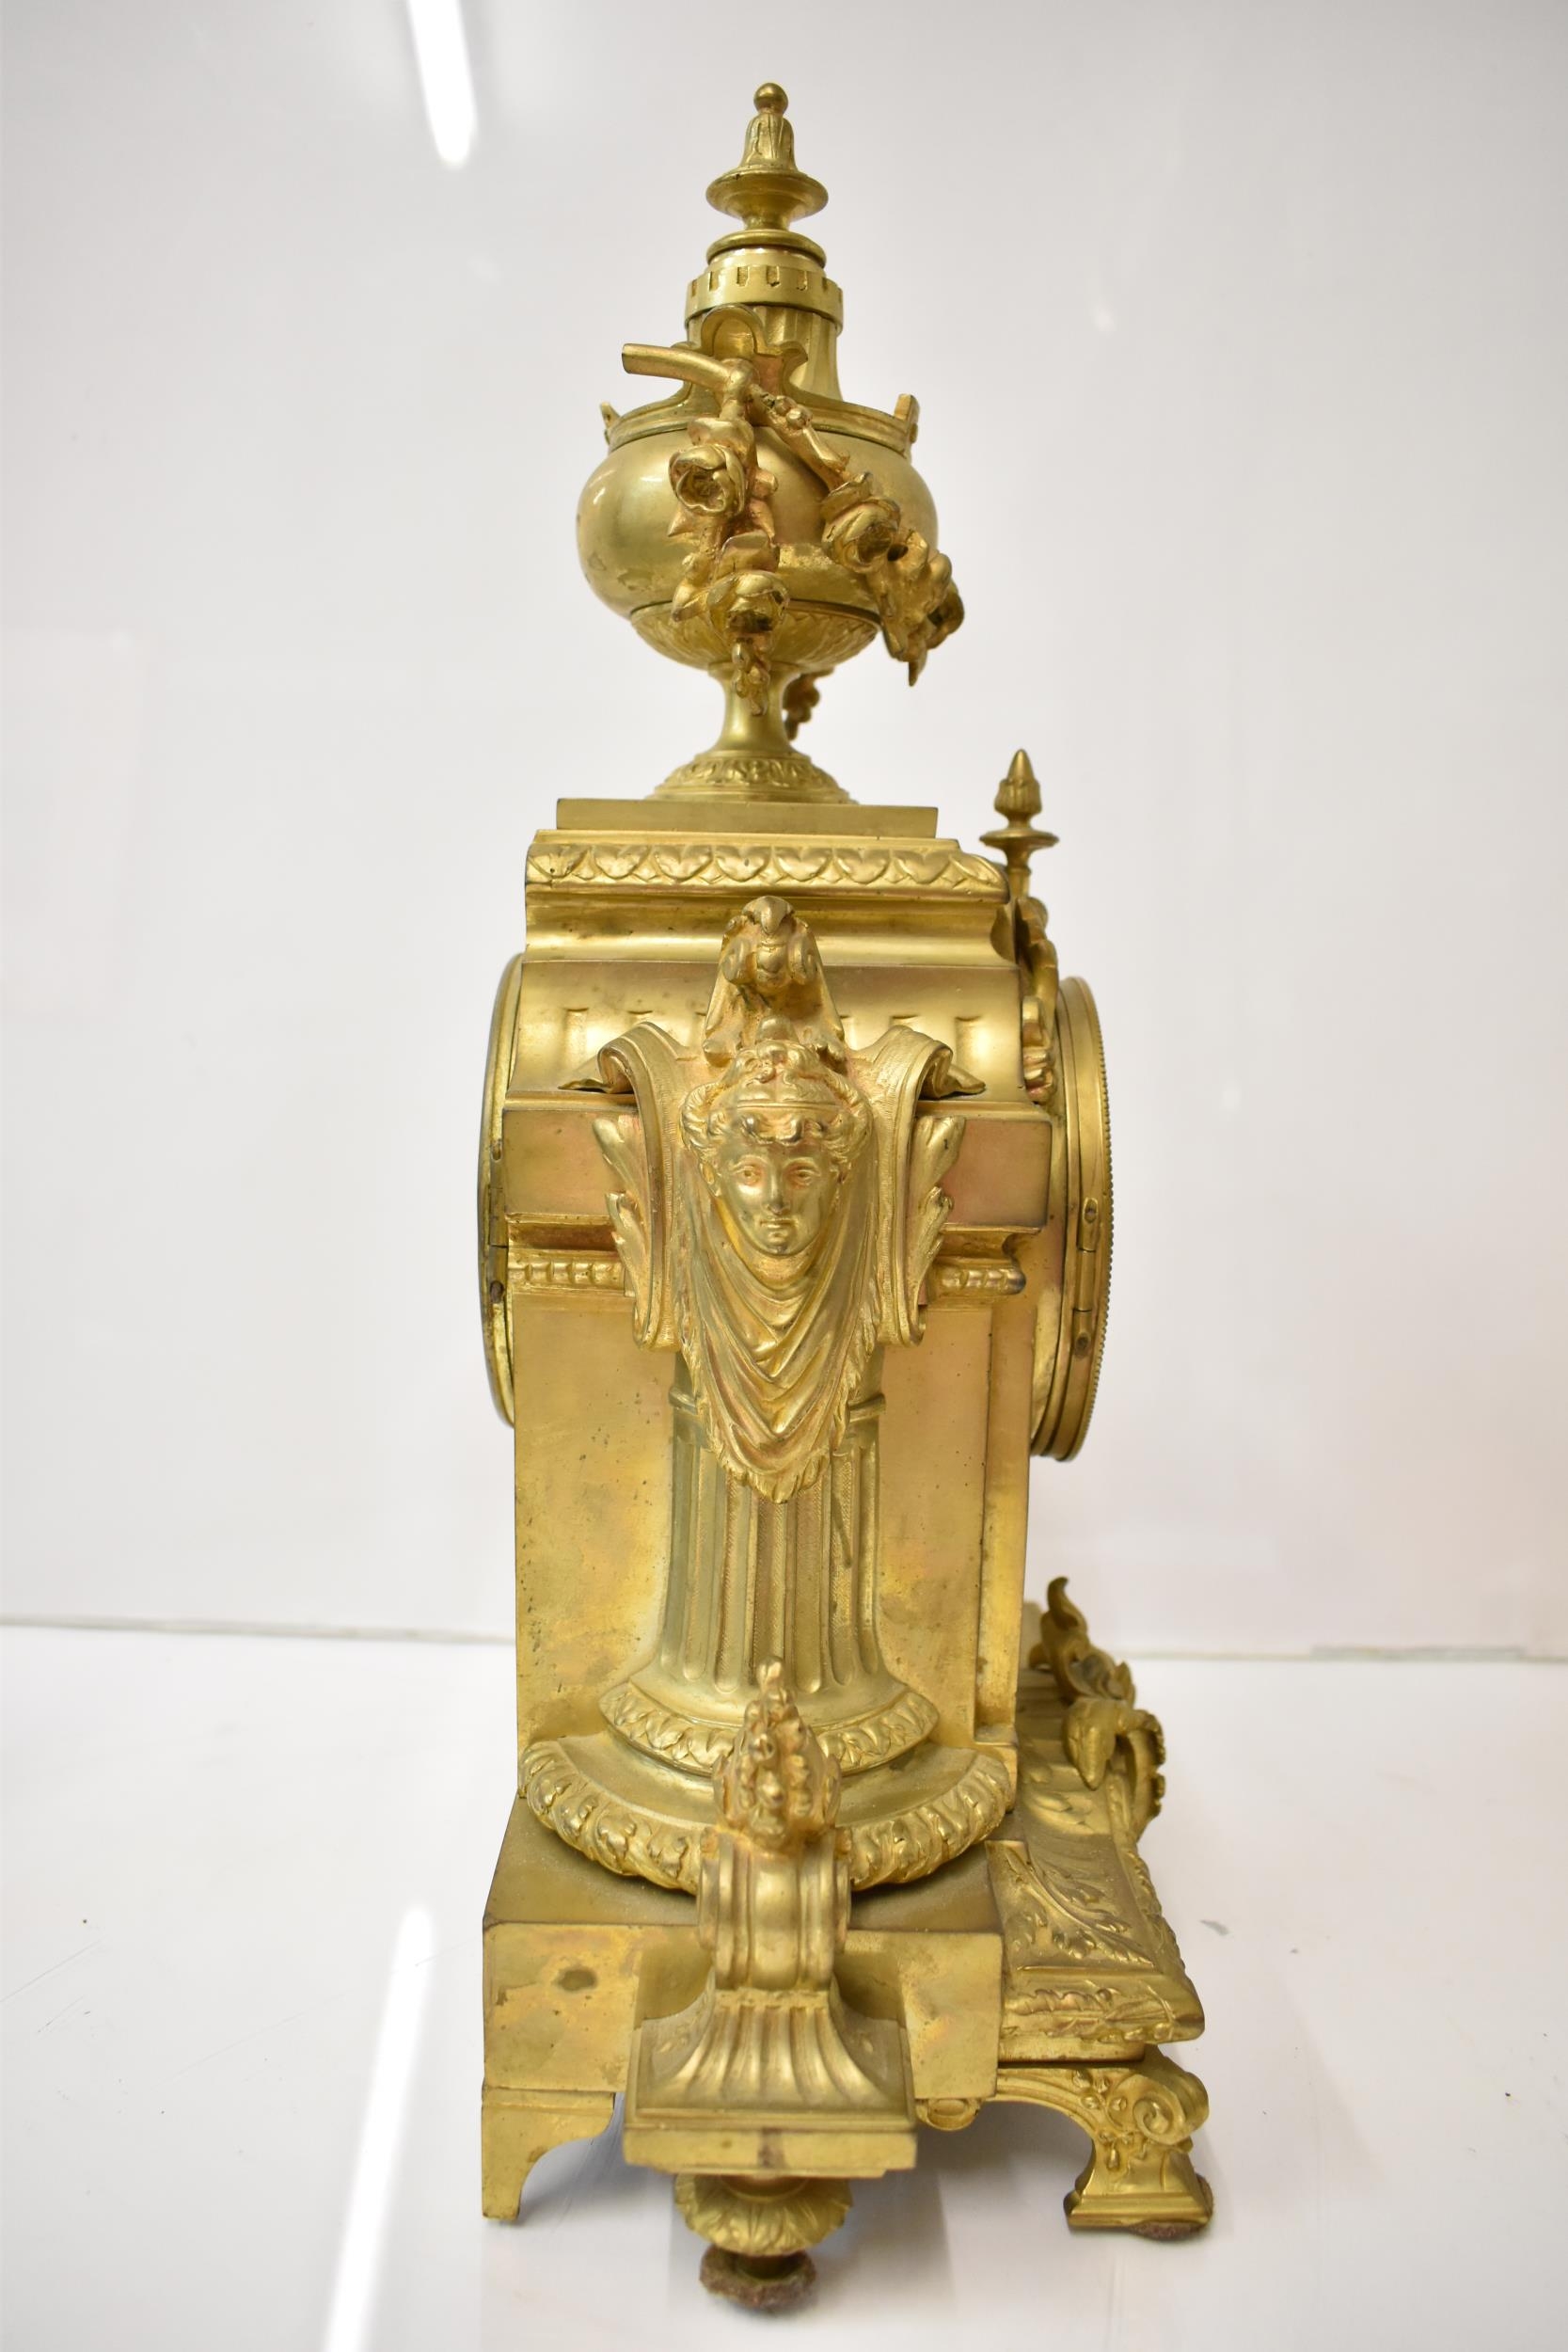 A 19th century French gilt metal mantel clock, the case having an urn shaped finial with floral - Image 2 of 6